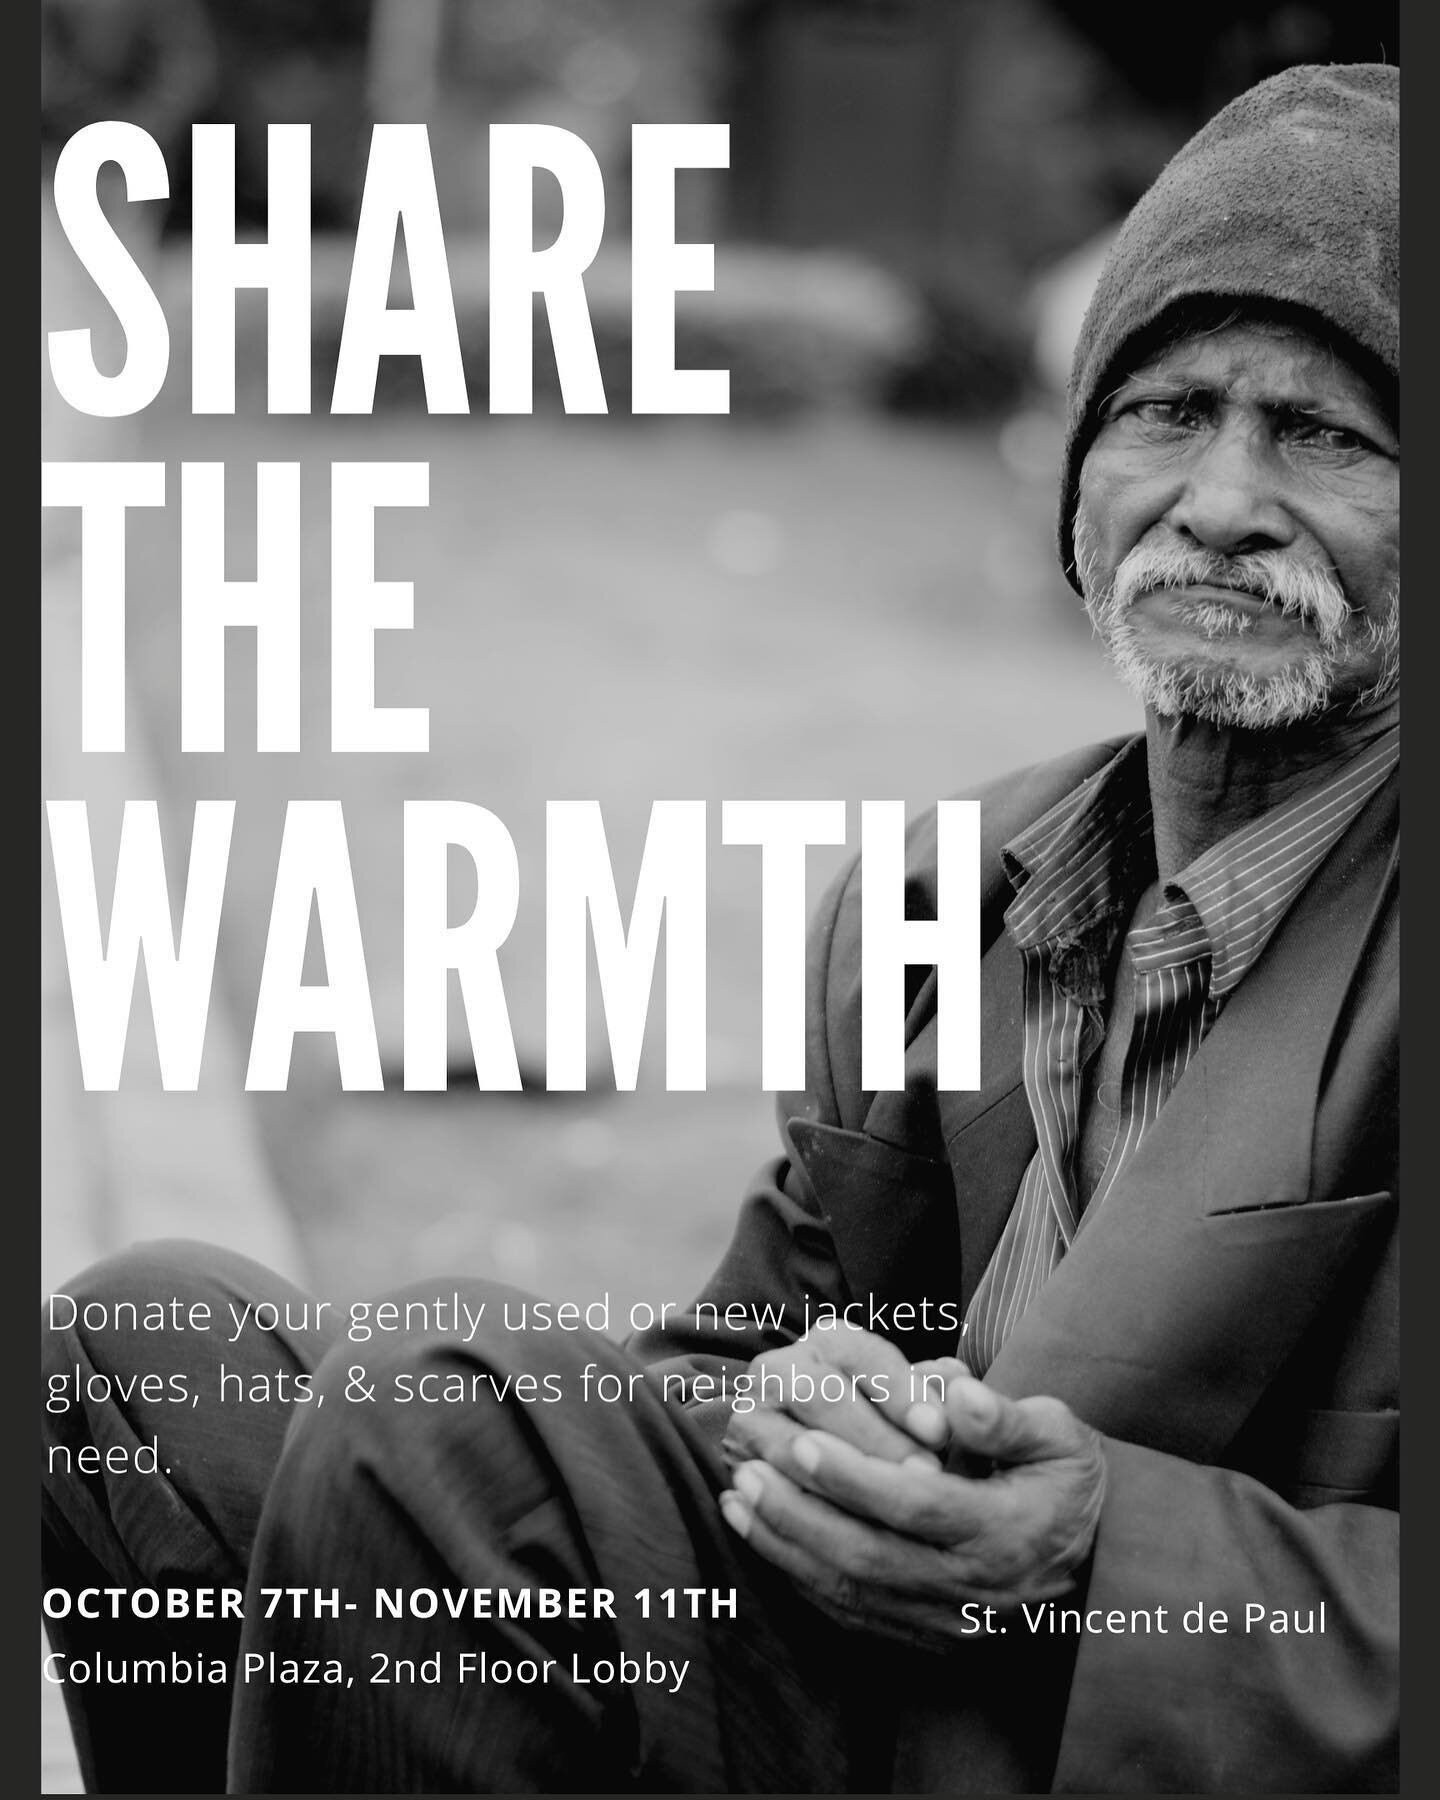 Help our neighbors stay warm this season &amp; donate your gently used or new coats, hats, gloves &amp; scarves! 🧤

#donate #sharethewarmth #coatdrive #winter #coldseason #columbiaplaza #cincinnati #stvincentdepaul #community #engagement